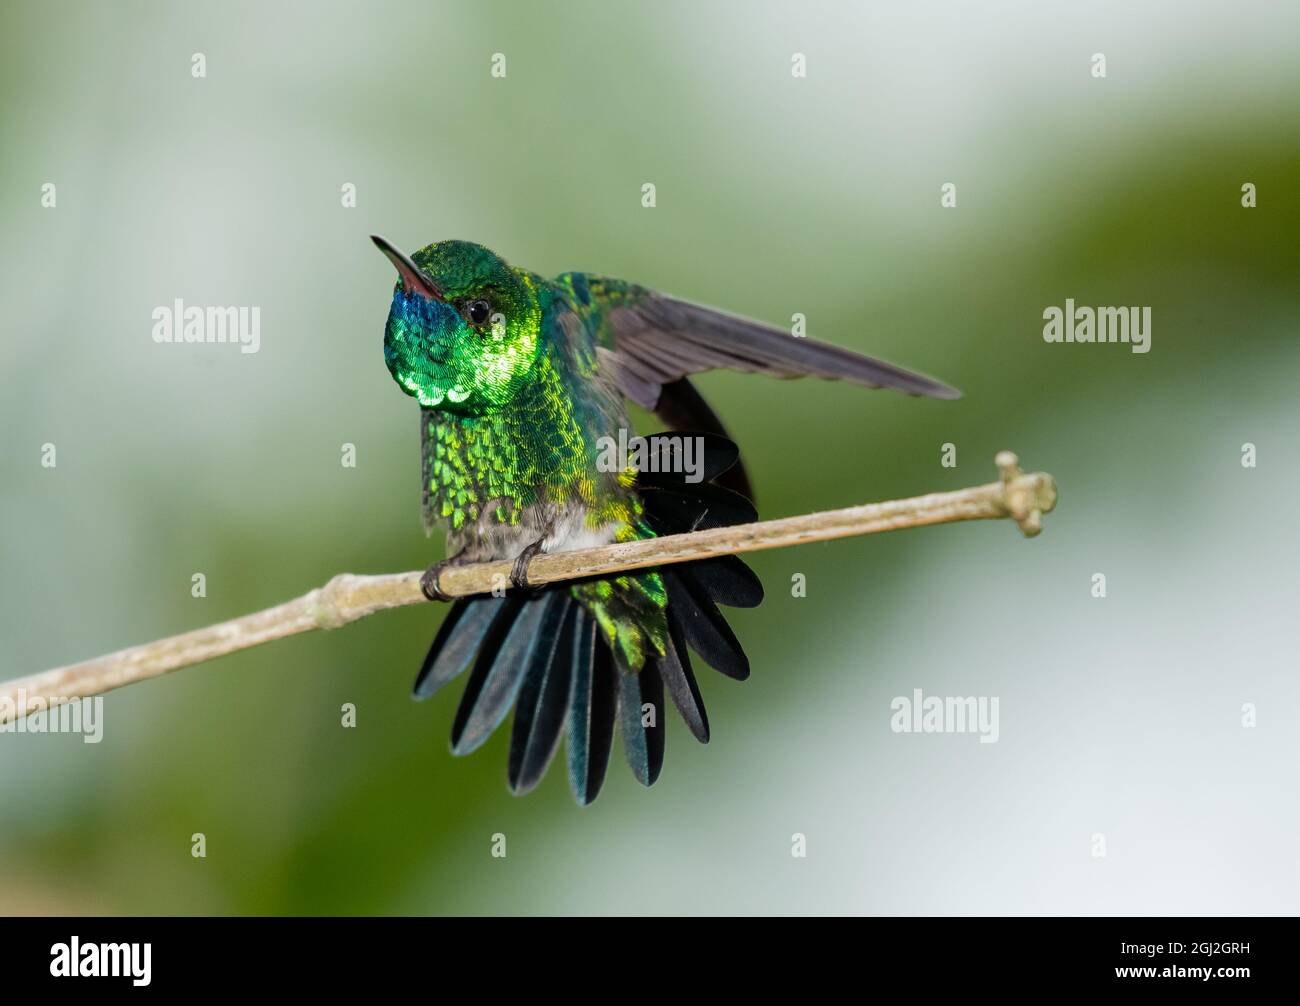 A Blue-chinned Sapphire hummingbird (Chlorestes notata) stretching with a soft blurred background. Bird perching. Stock Photo